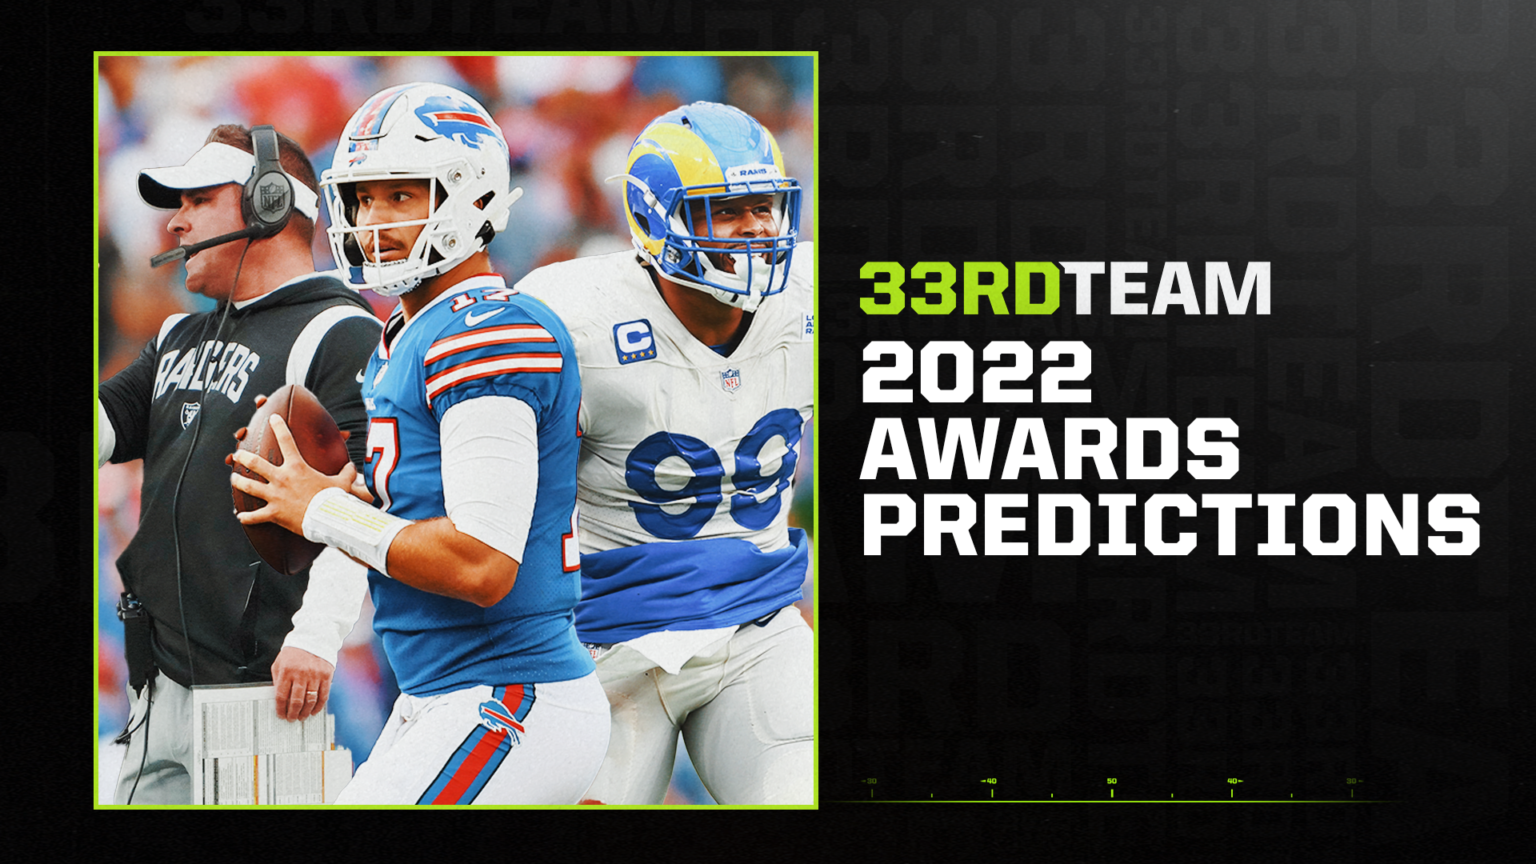 2022 NFL Awards Predictions MVP, Rookies of the Year, and More The